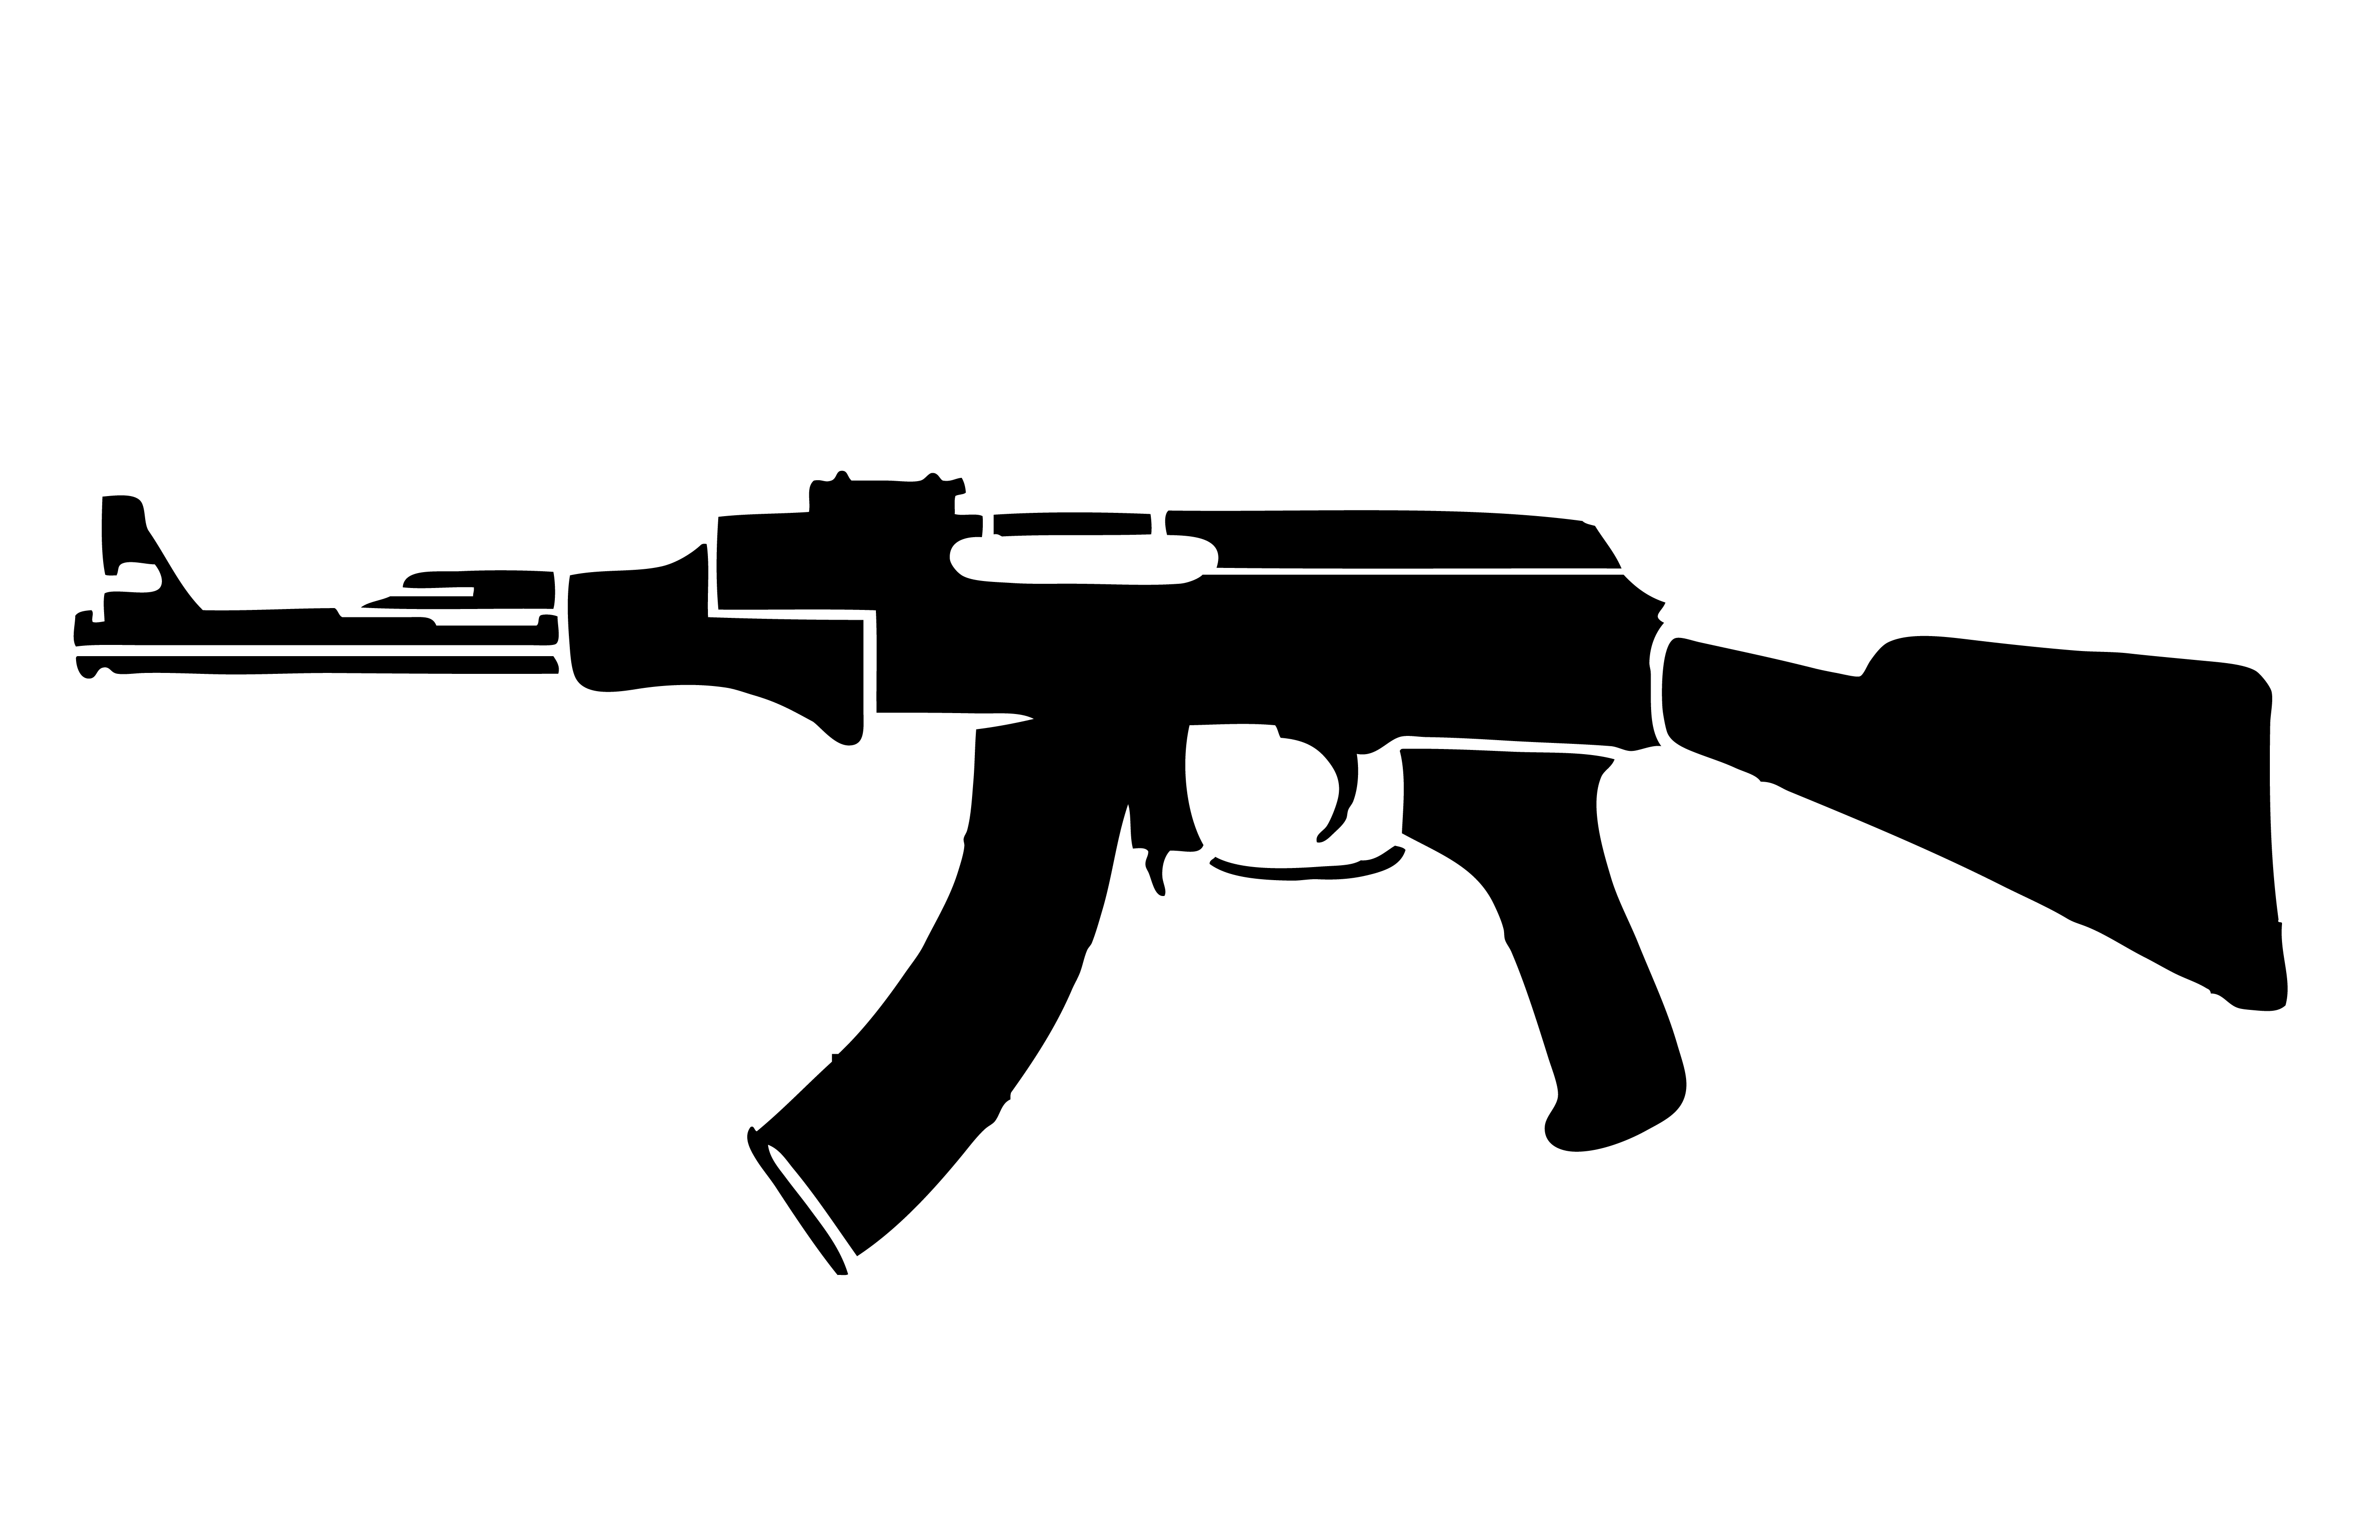 AK 47 Stencil by car54 on Clipart library